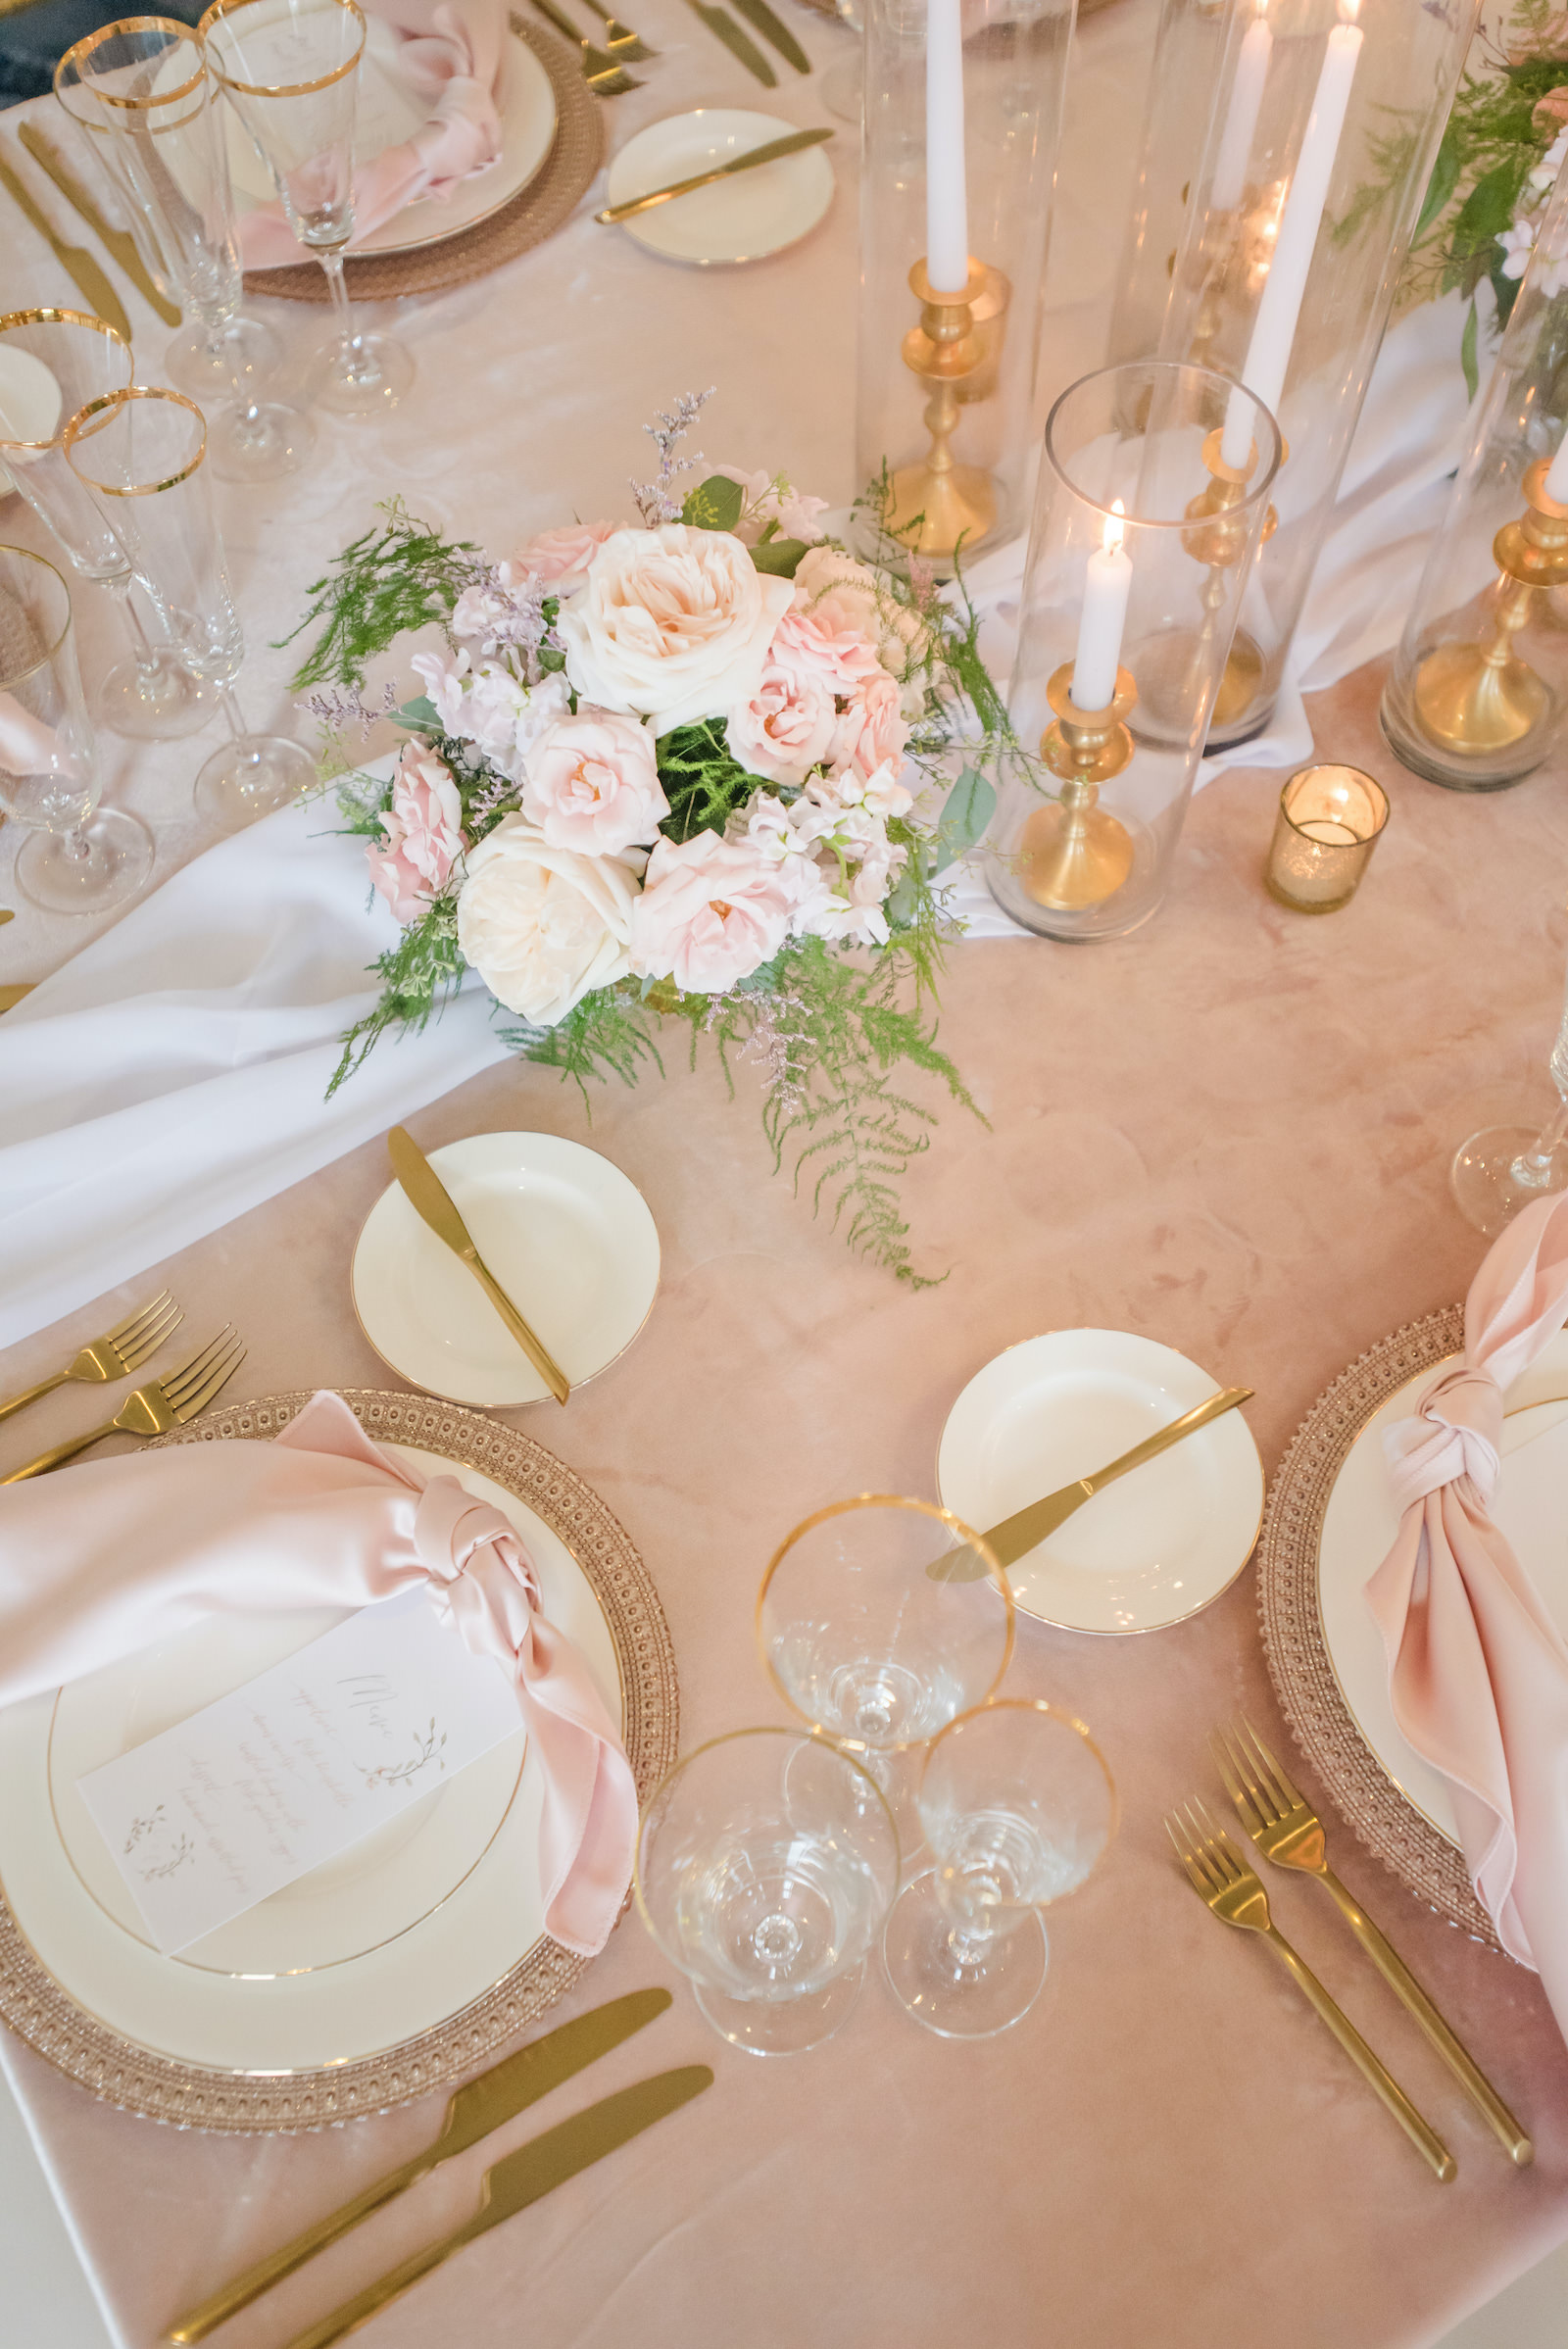 Romantic Classic Wedding Reception Decor, Blush Pink Linen, Gold Silverware, White Table Runner, Pastel Floral Centerpiece with Ivory and Pink Roses, Greenery and Lilac Flowers, Gold Candlesticks | Tampa Bay Wedding Planner Elegant Affairs by Design | Table Design Kate Ryan Event Rentals | Don Cesar Styled Wedding